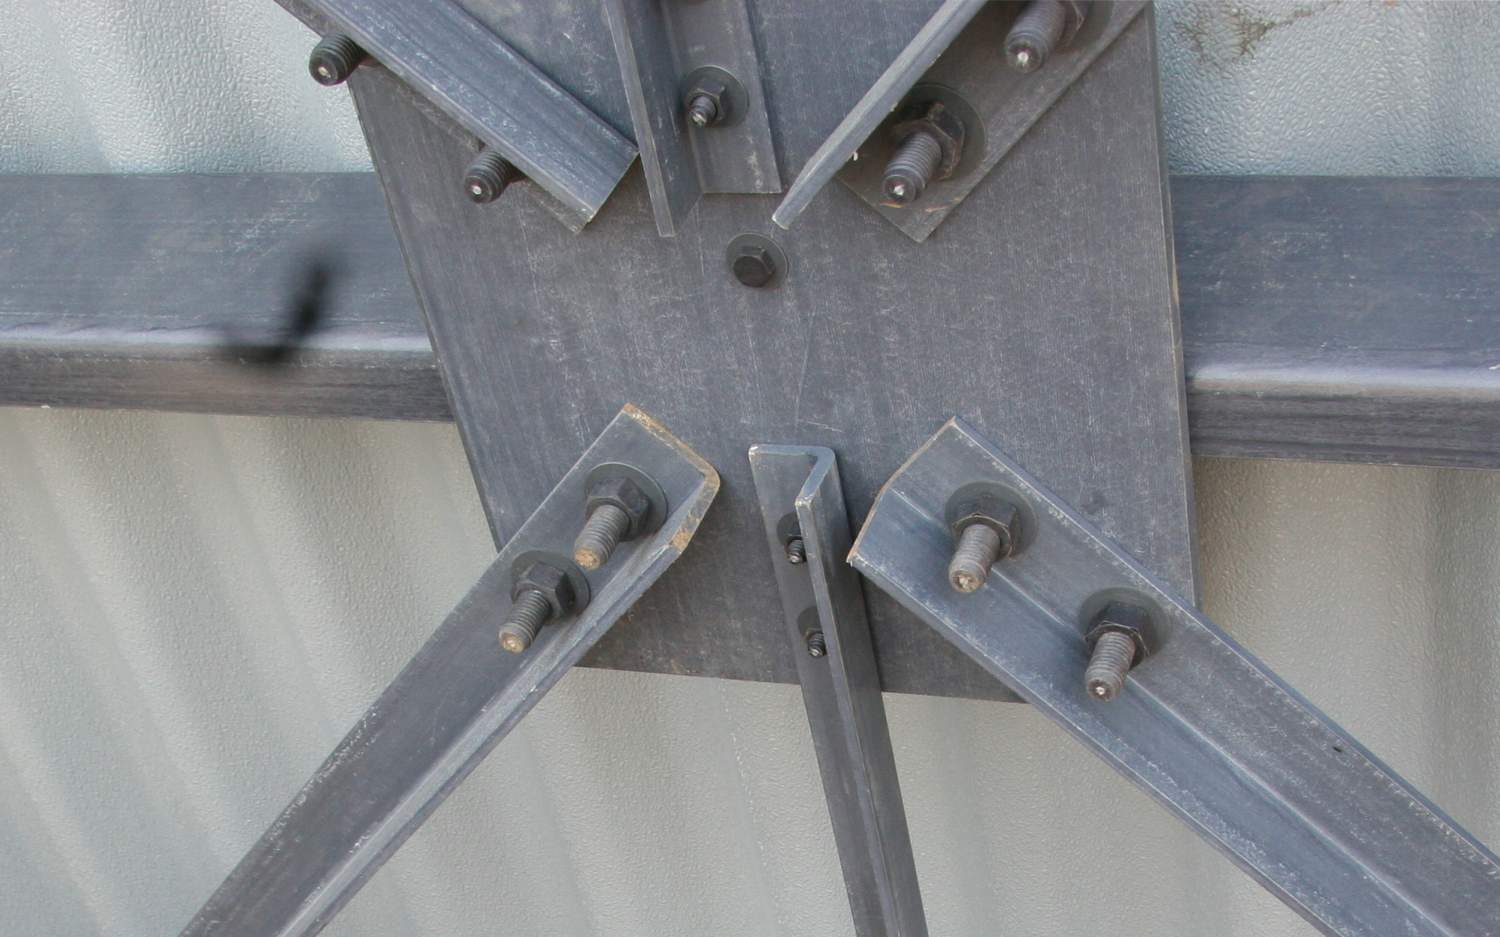 Close-up of center stability plate, back surface.